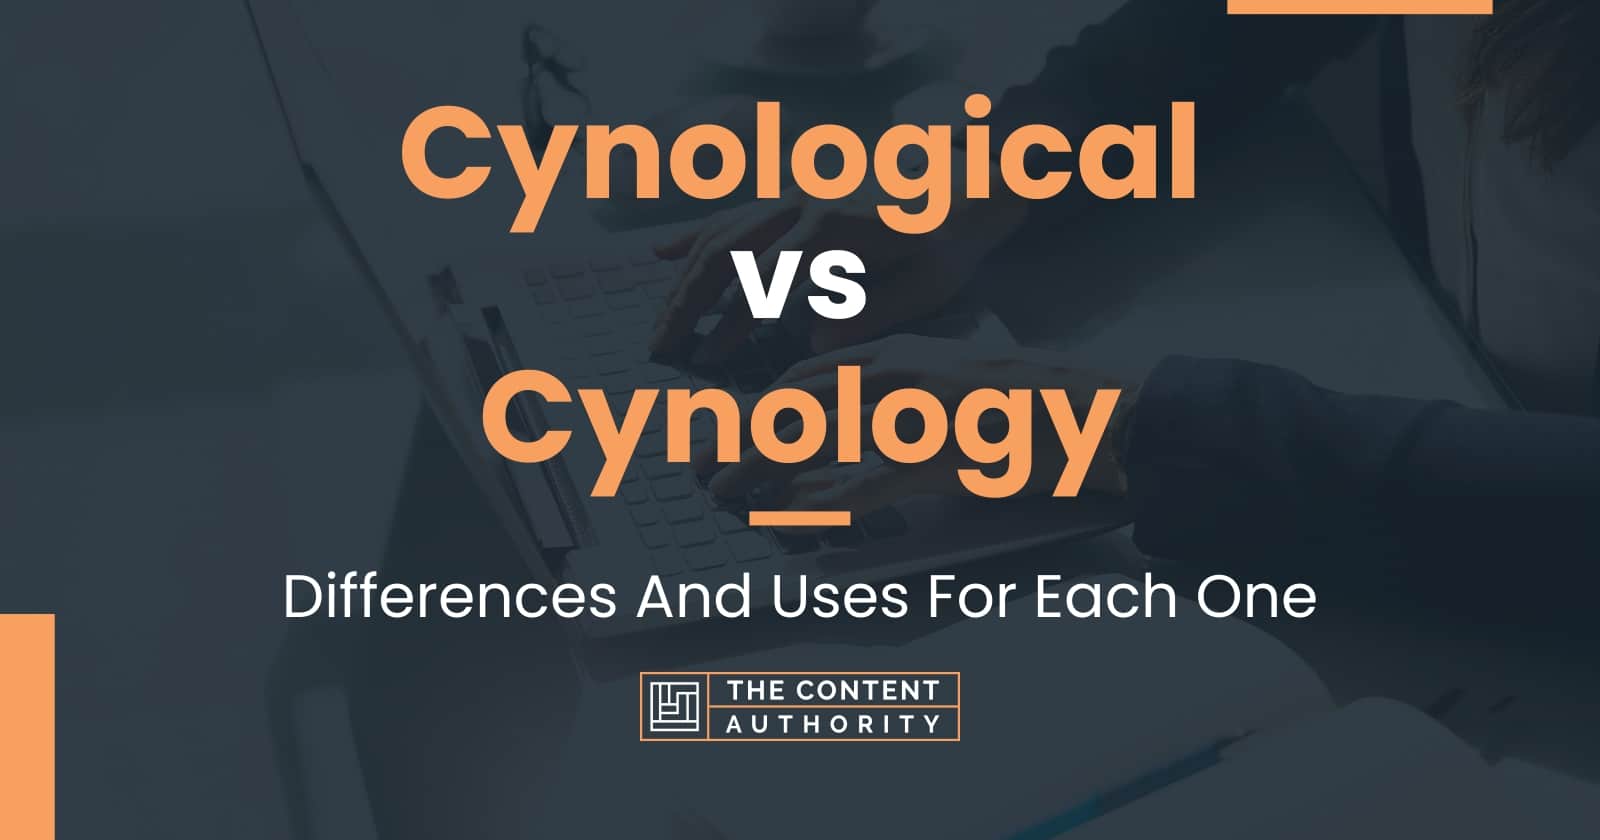 Cynological vs Cynology: Differences And Uses For Each One